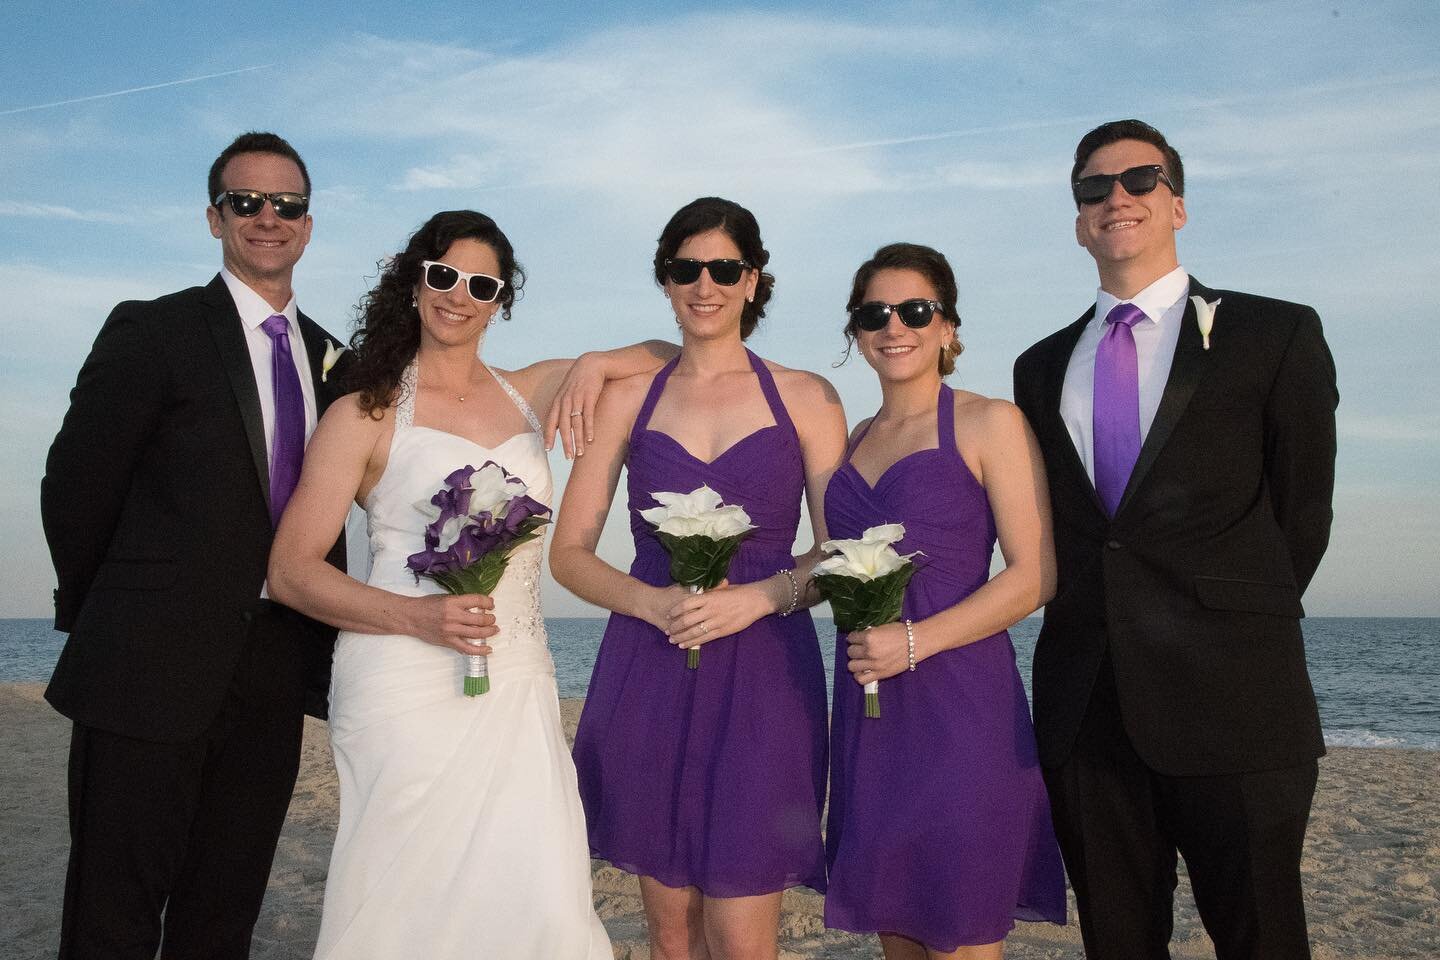 A Wrightsville Beach Wedding. A fantastic wedding on Wrightsville Beach. The wedding was at St. Therese Catholic Church, followed by formals and romantic shots on the beach. The reception was held at the Blue Water Grill. The wedding party took a boa